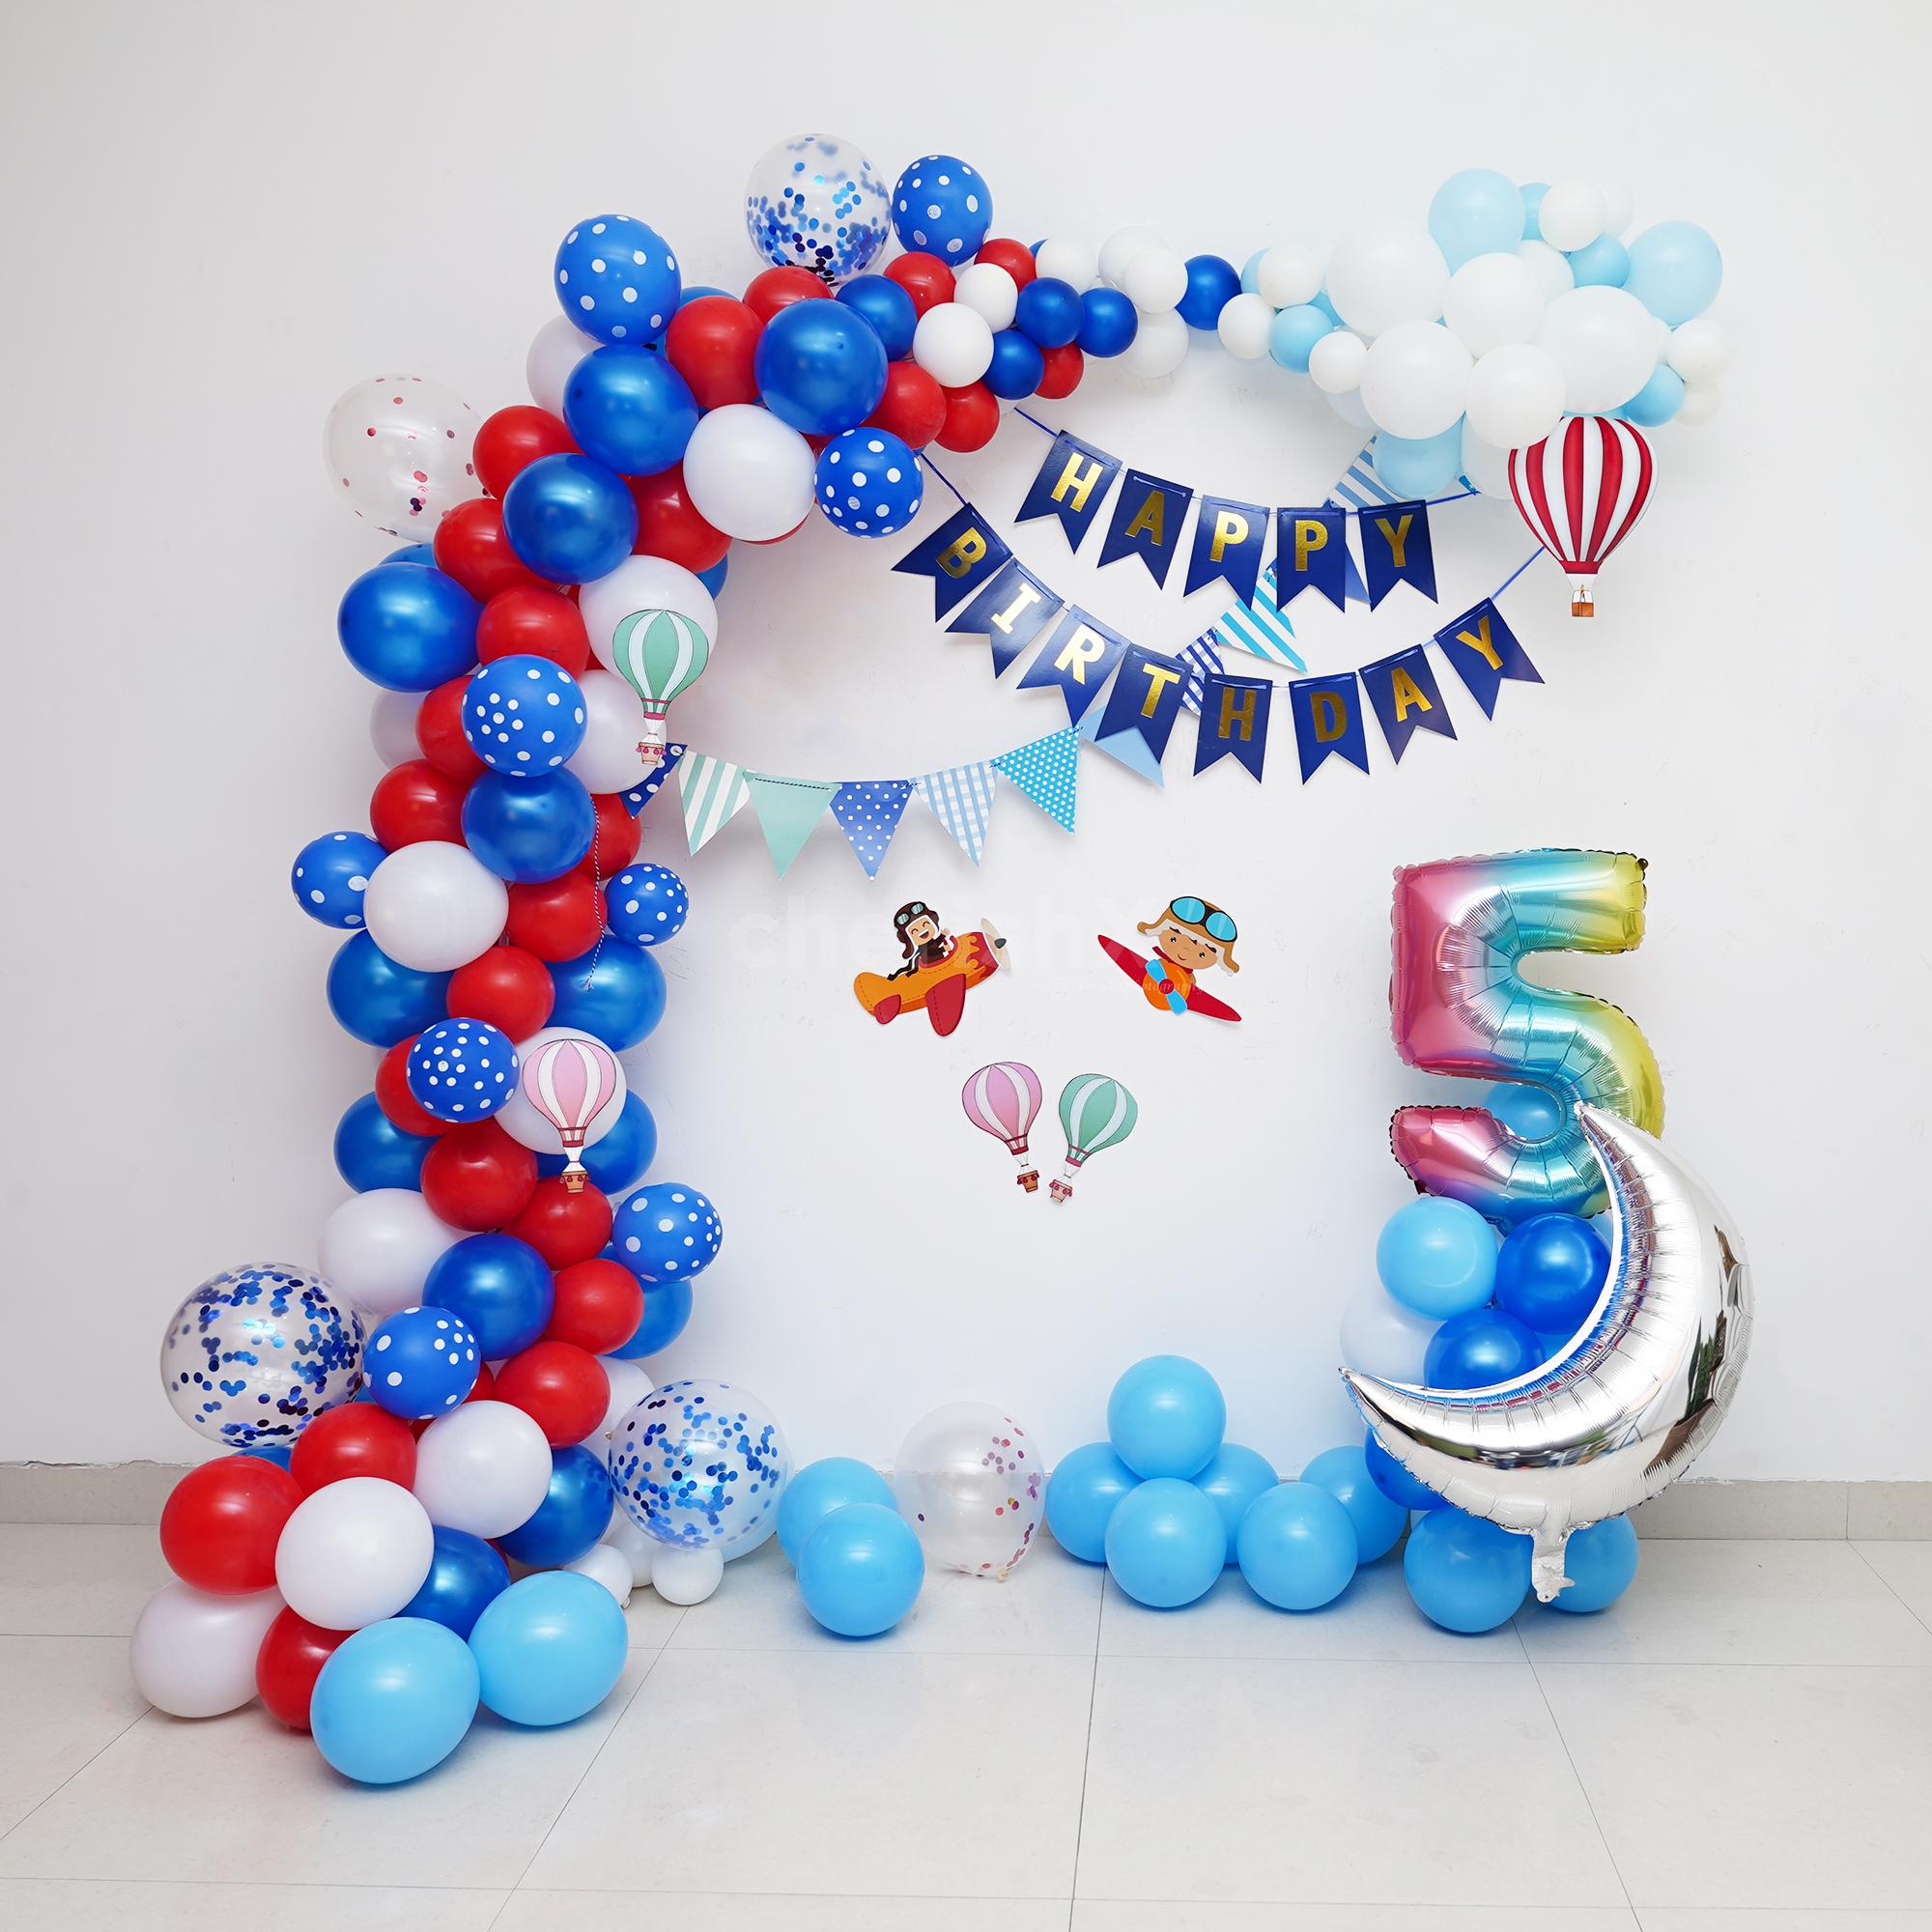 Blue and Silver Theme Occasion Ring Balloon Decoration at Home,Mumbai –